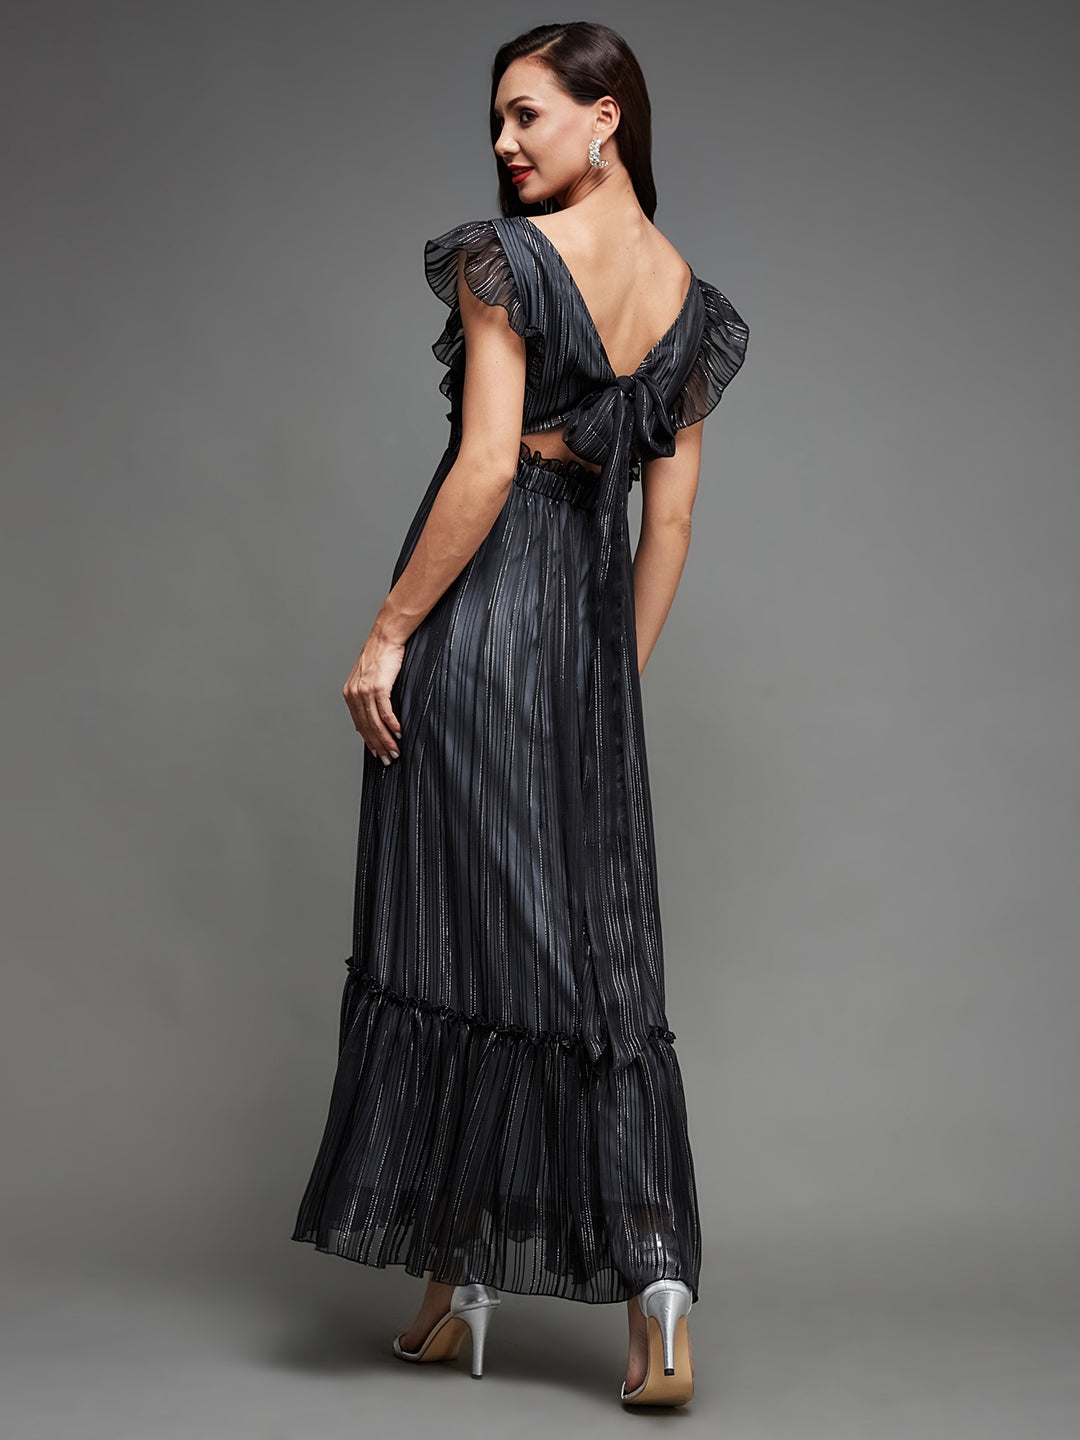 Black Square Neck Layered Ruffles Sleeve Floral Patterned Tiered Maxi Georgette Dress